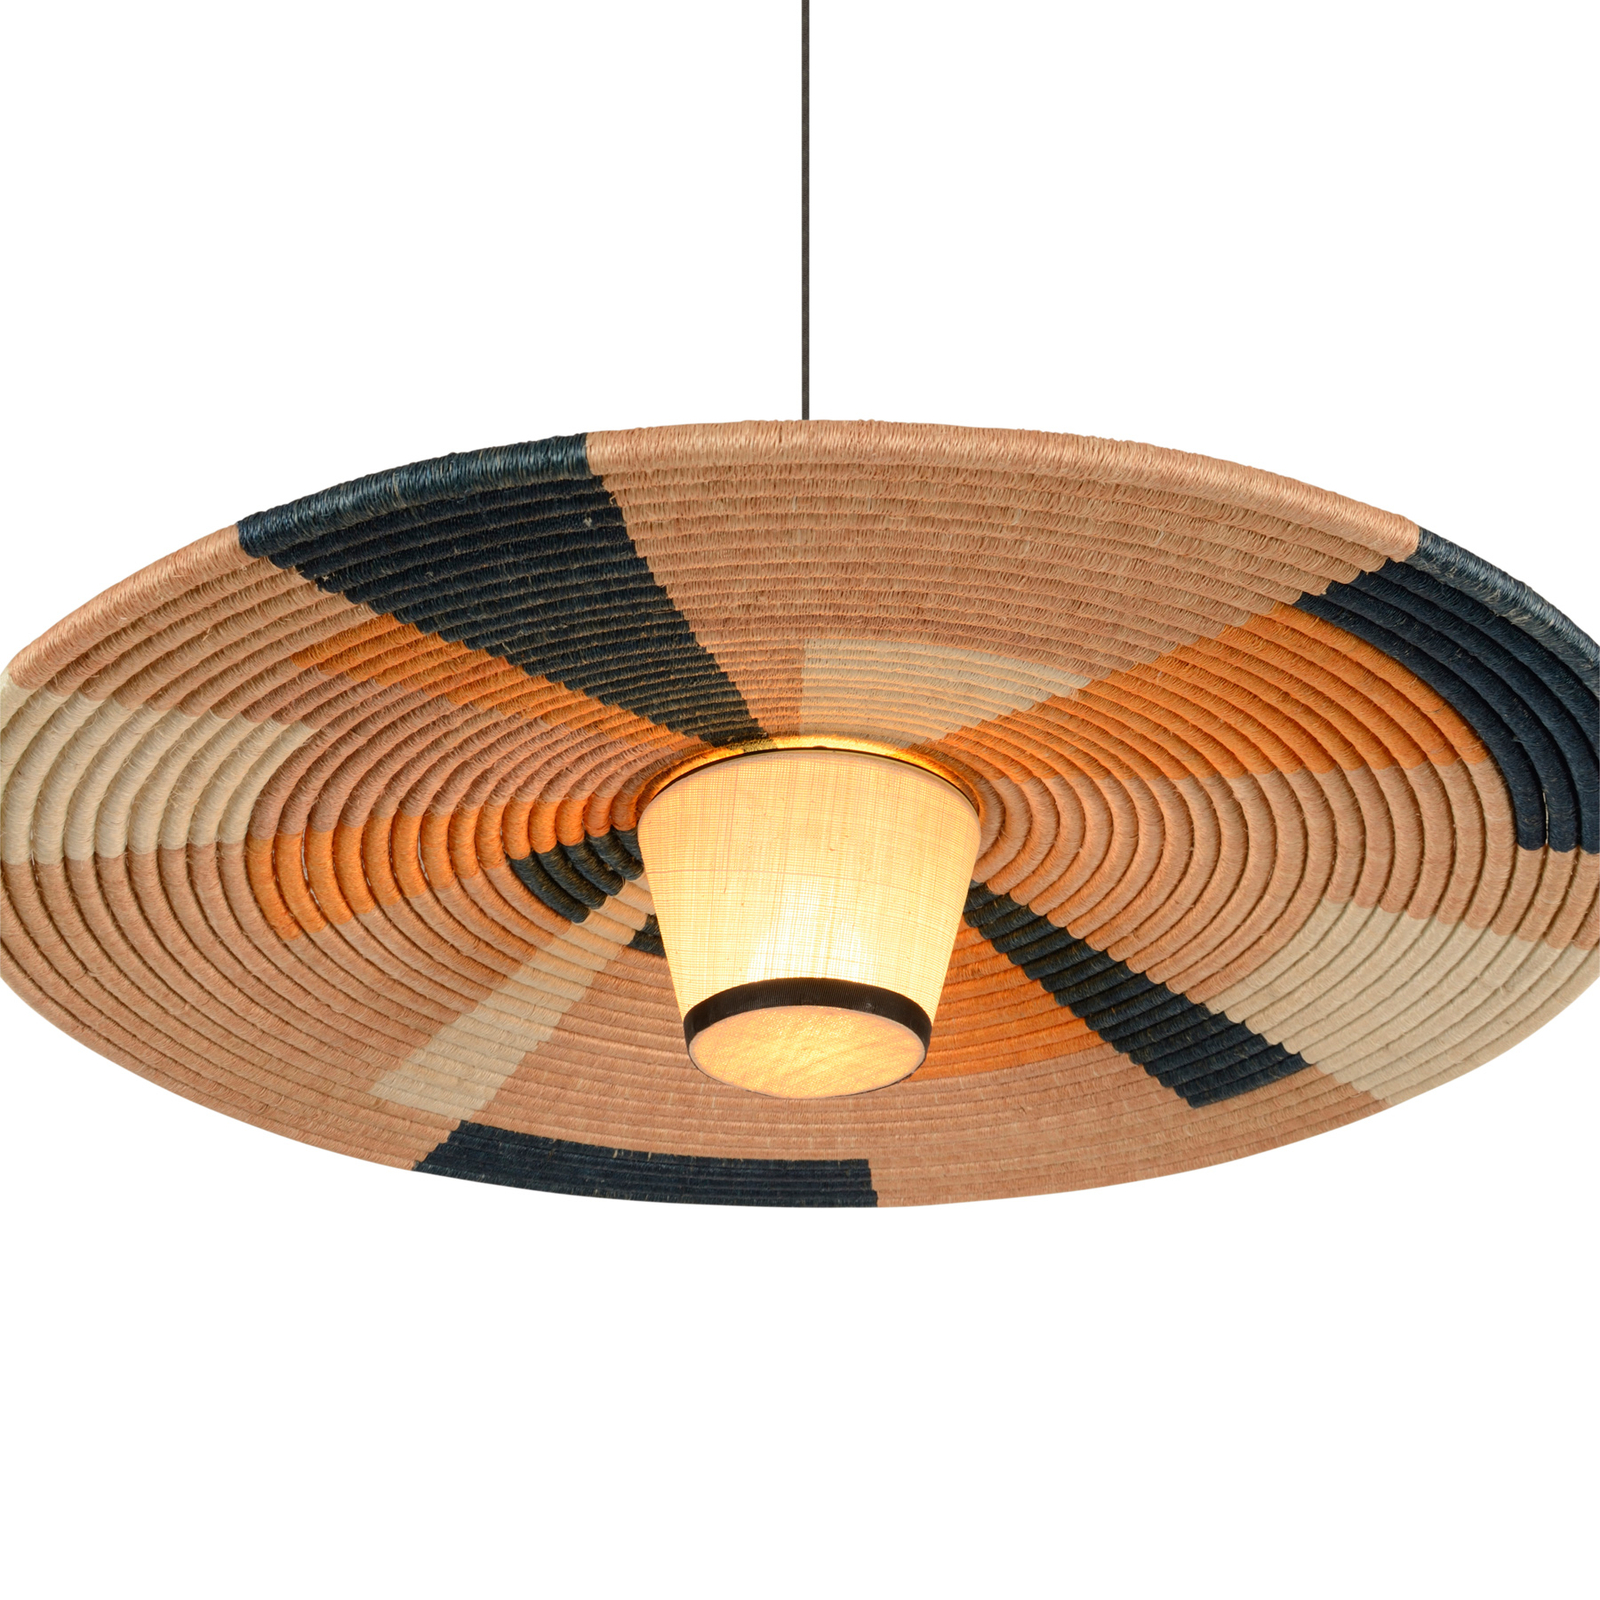 Forestier Parrot hanging light L, sand-coloured